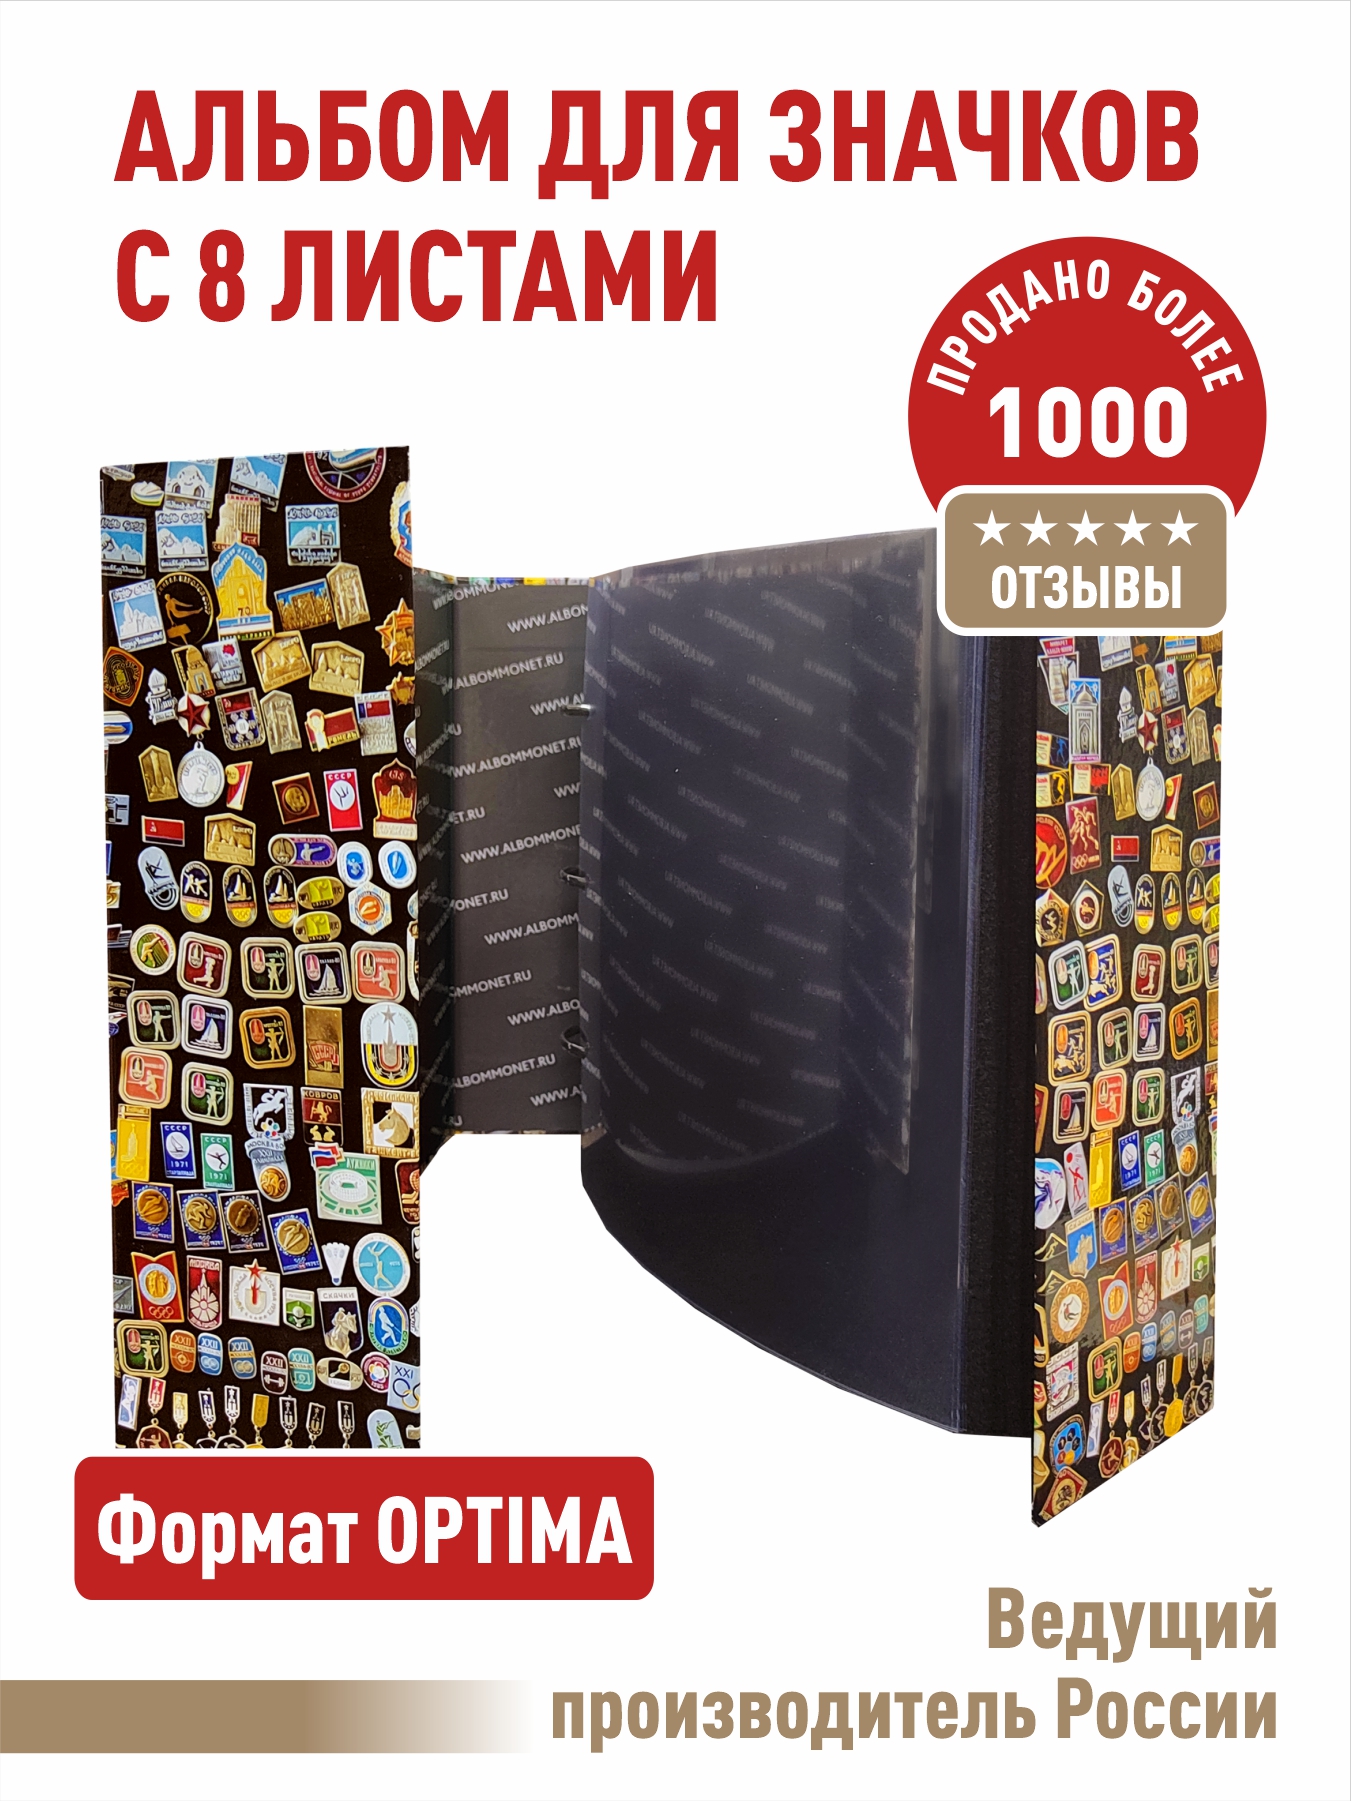 Dictionary of Spoken Russian/Russian-English/Text1 - Wikisource, the free online library